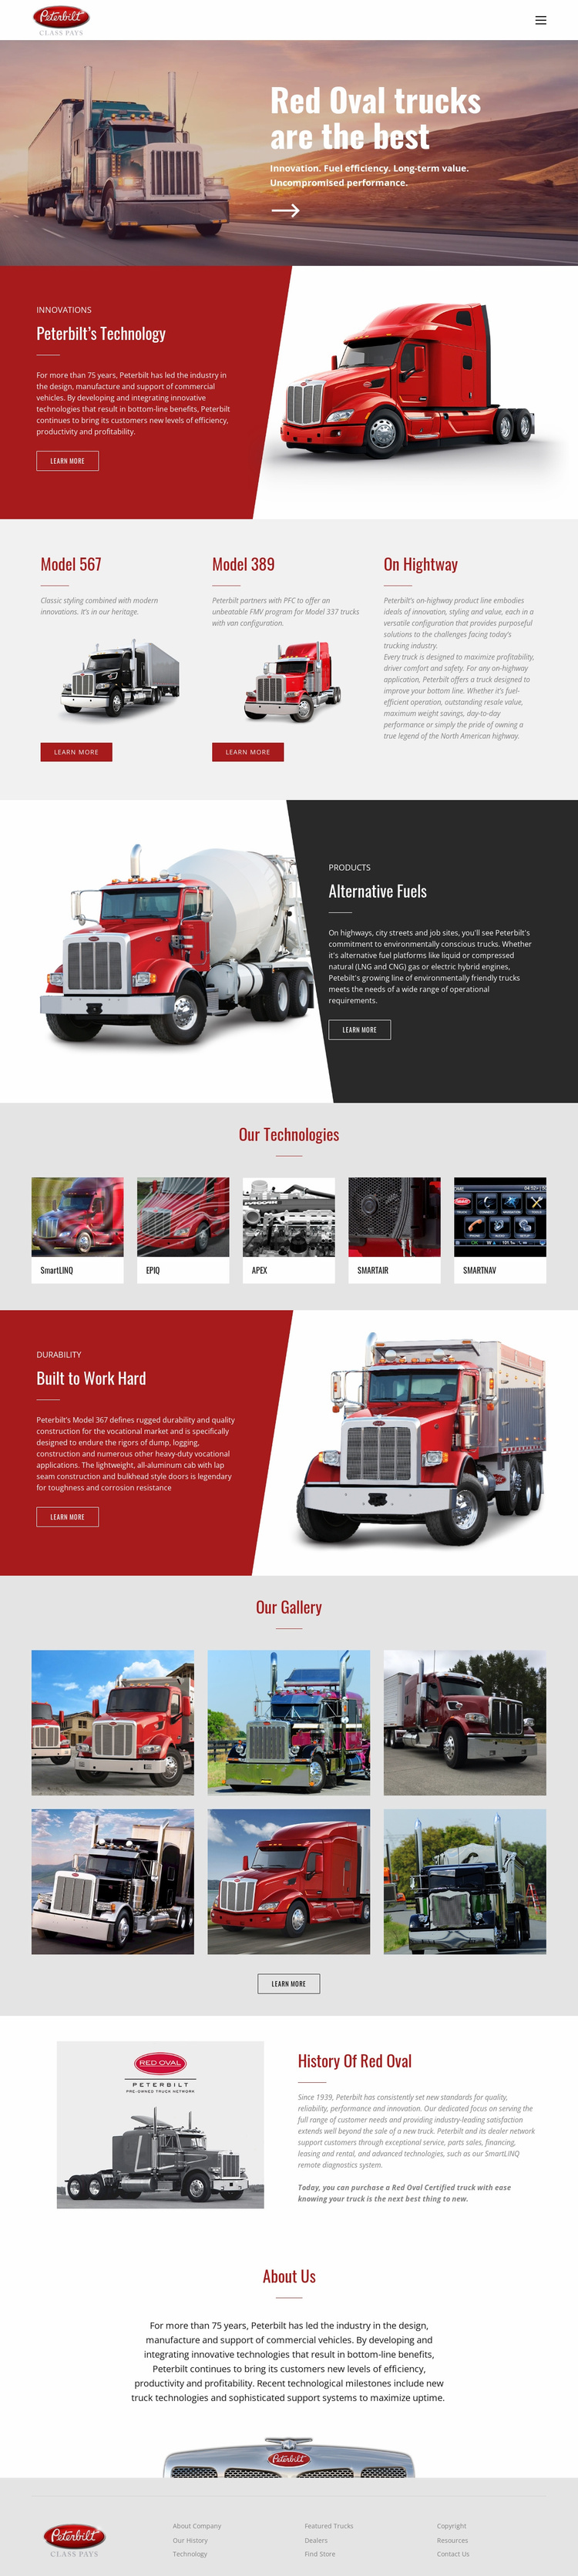 Red oval truck transportaion Website Template